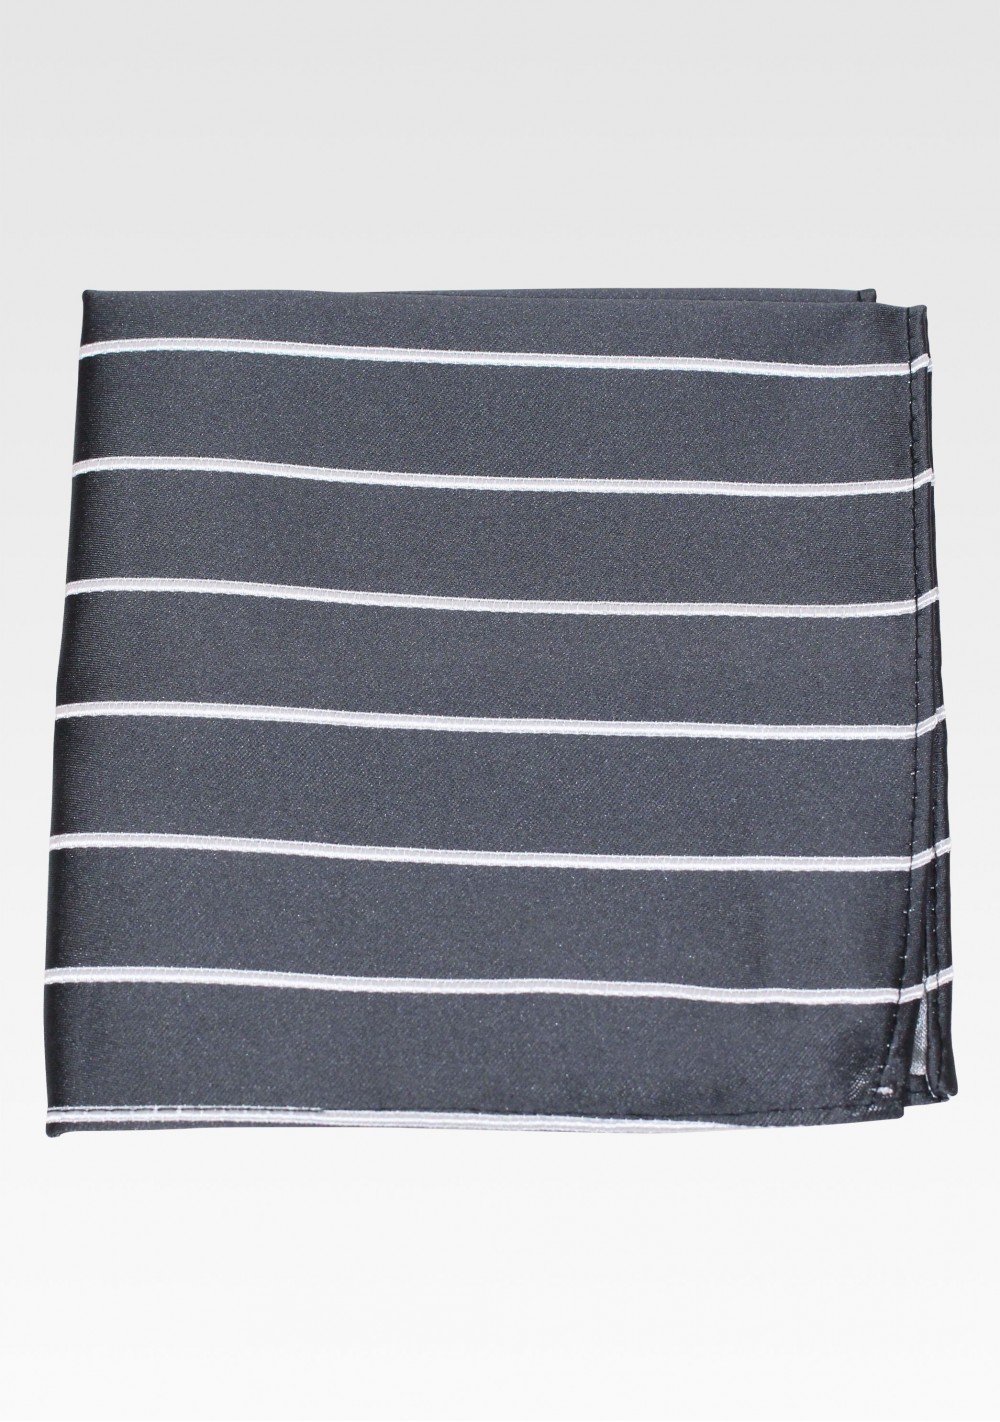 Gray Suit Hanky with Silver Stripes | Dark Gray and Silver Striped ...